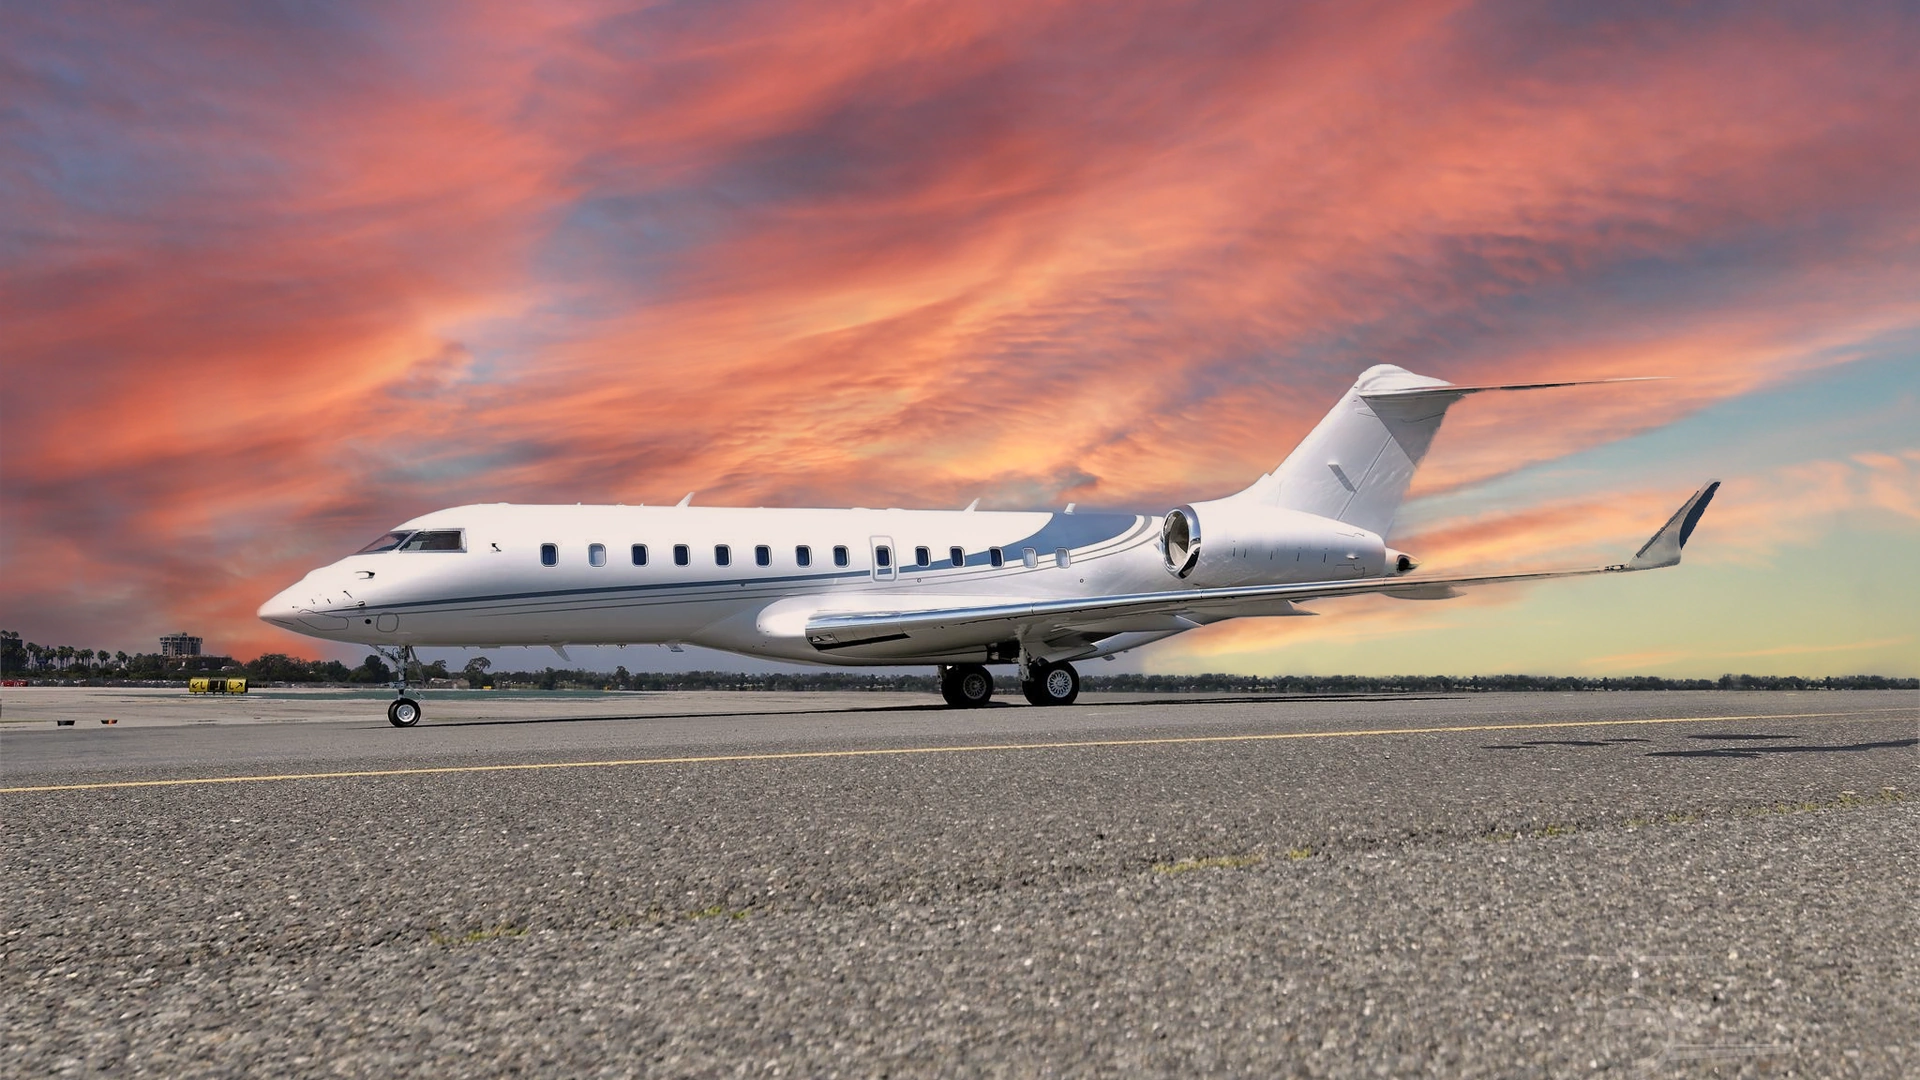 Alerion Bombardier Global - N80AK available for private charter by Alerion Aviation.